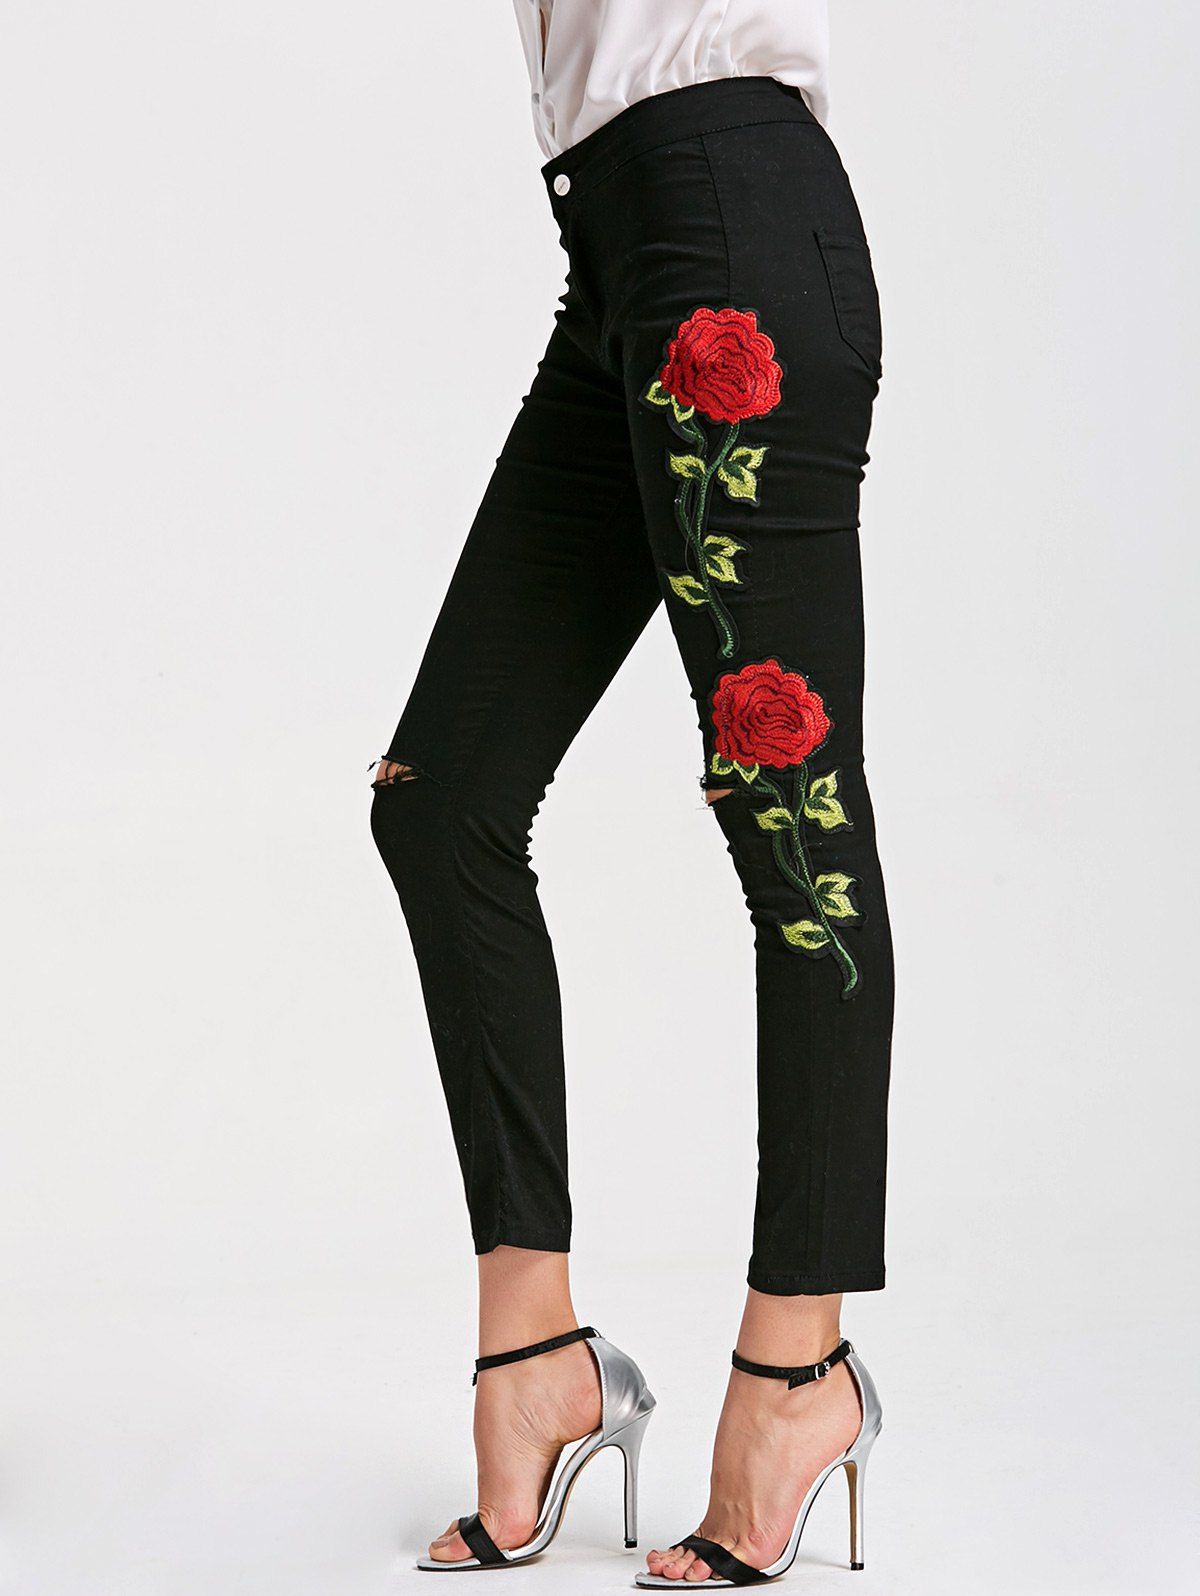 Floral Embroidery Skinny Ribbed Pants - BLACK L